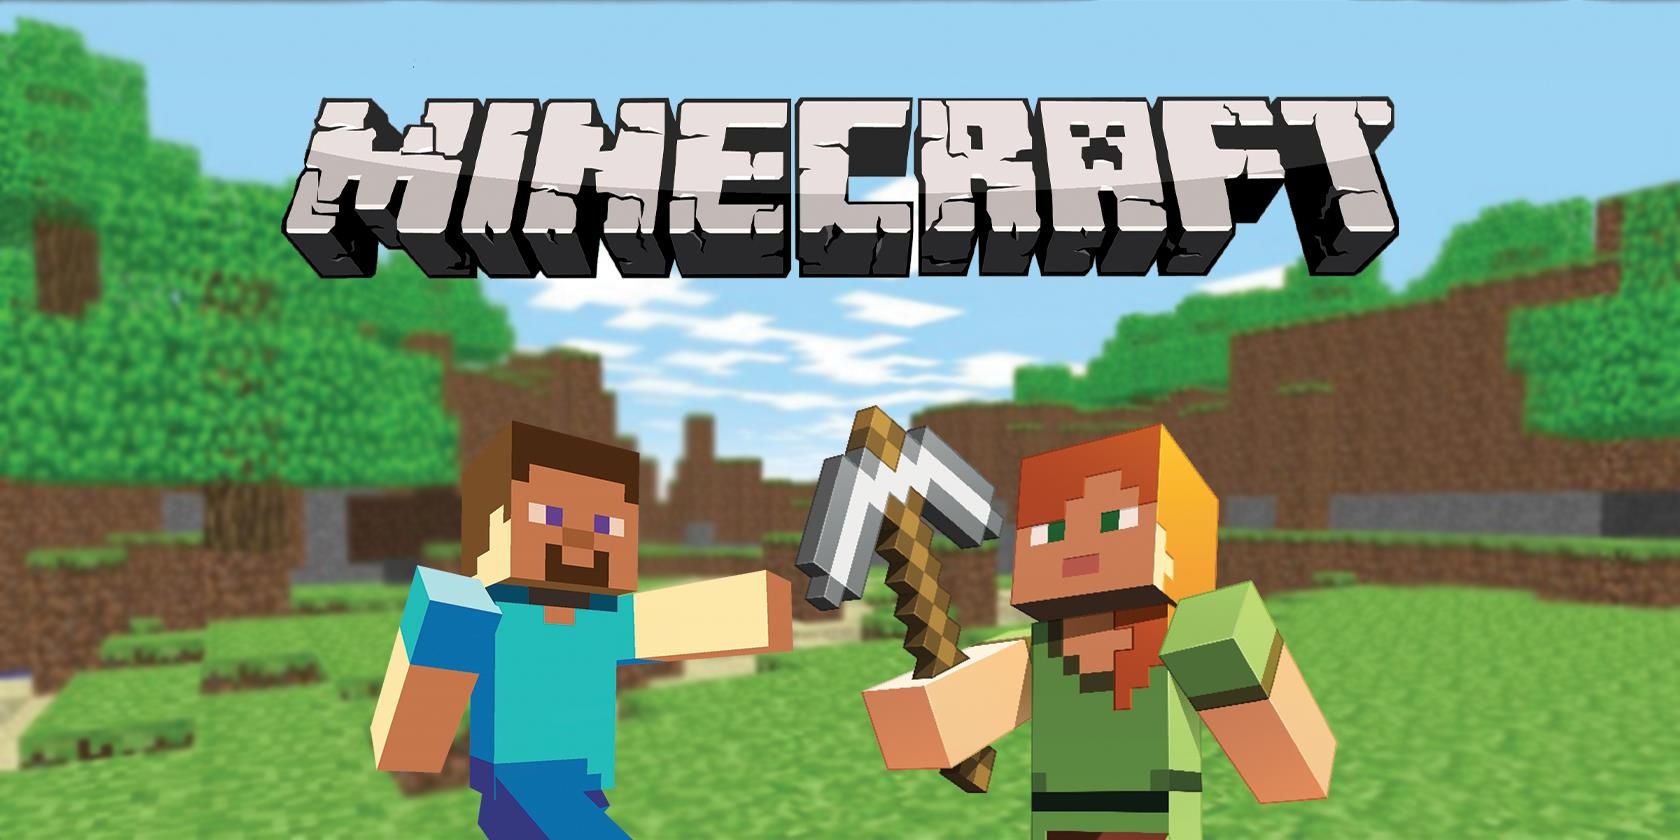 playing minecraft online for free